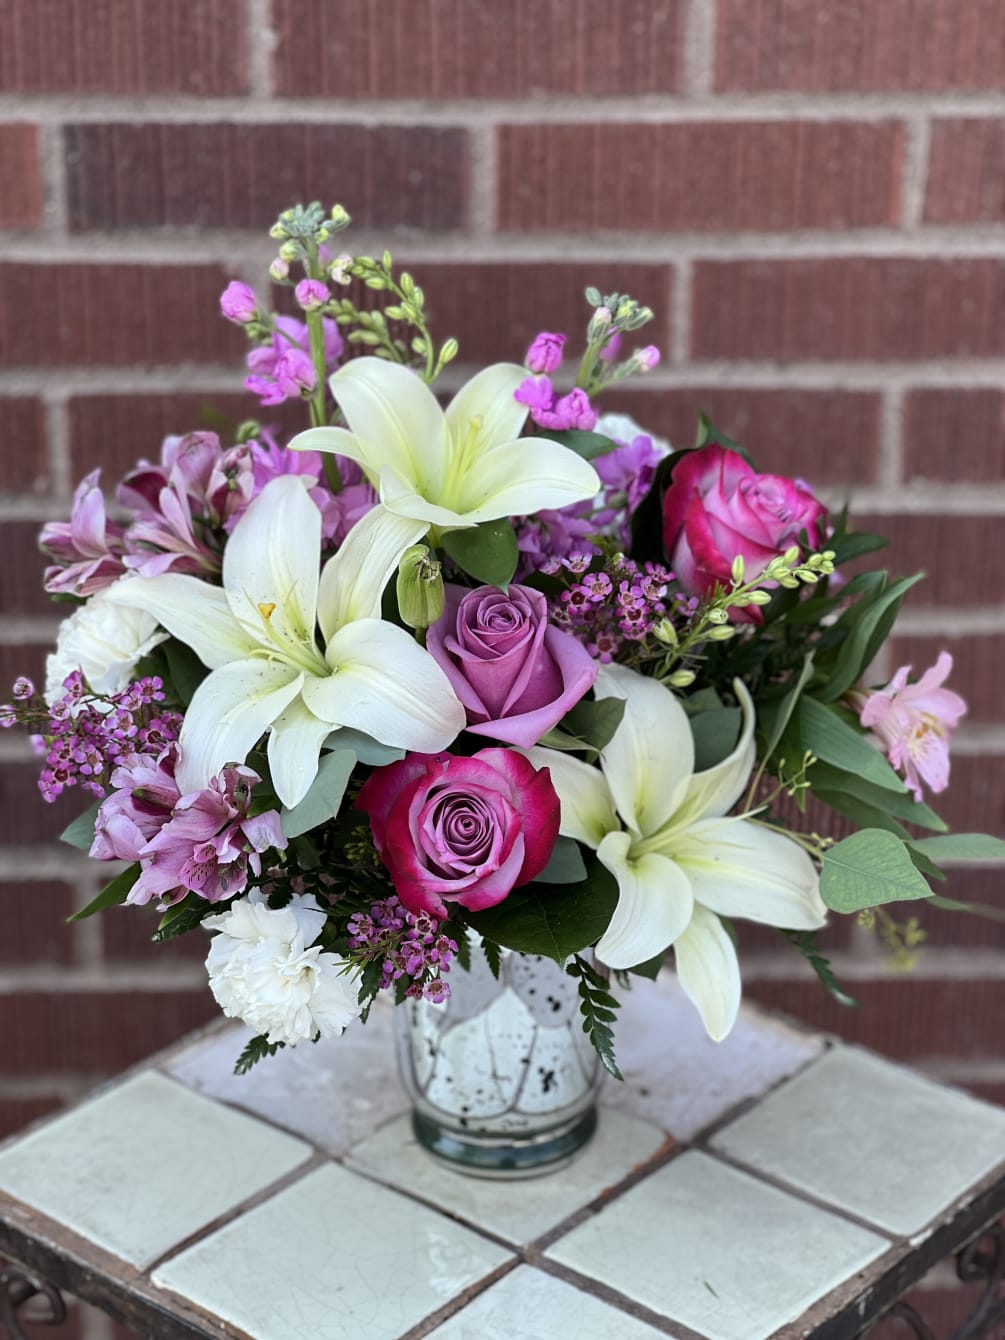 Make her dreams come true with this ethereal bouquet, presented in a